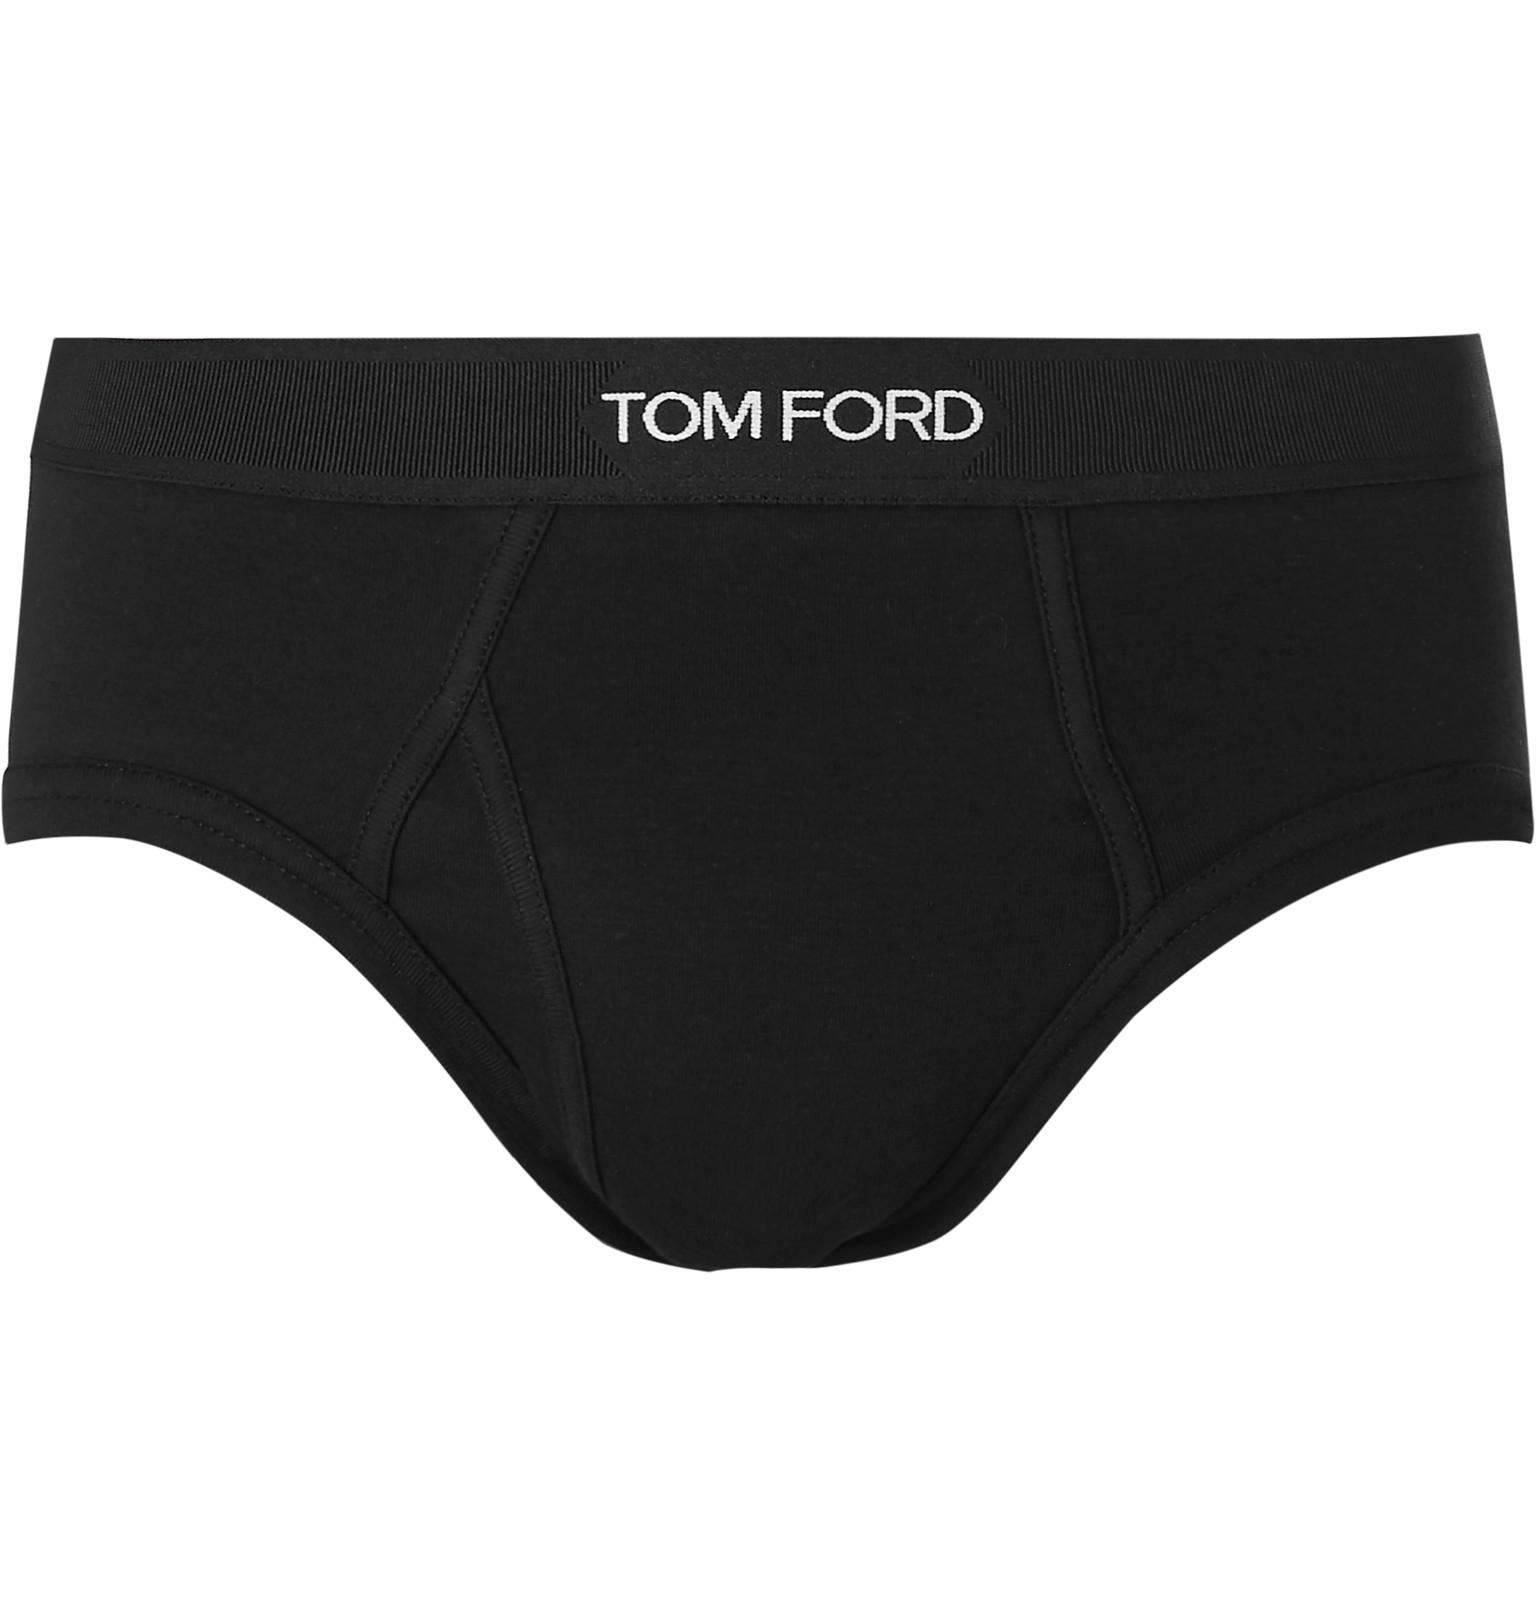 Tom Ford Stretch-cotton Briefs in Black for Men - Save 62% - Lyst